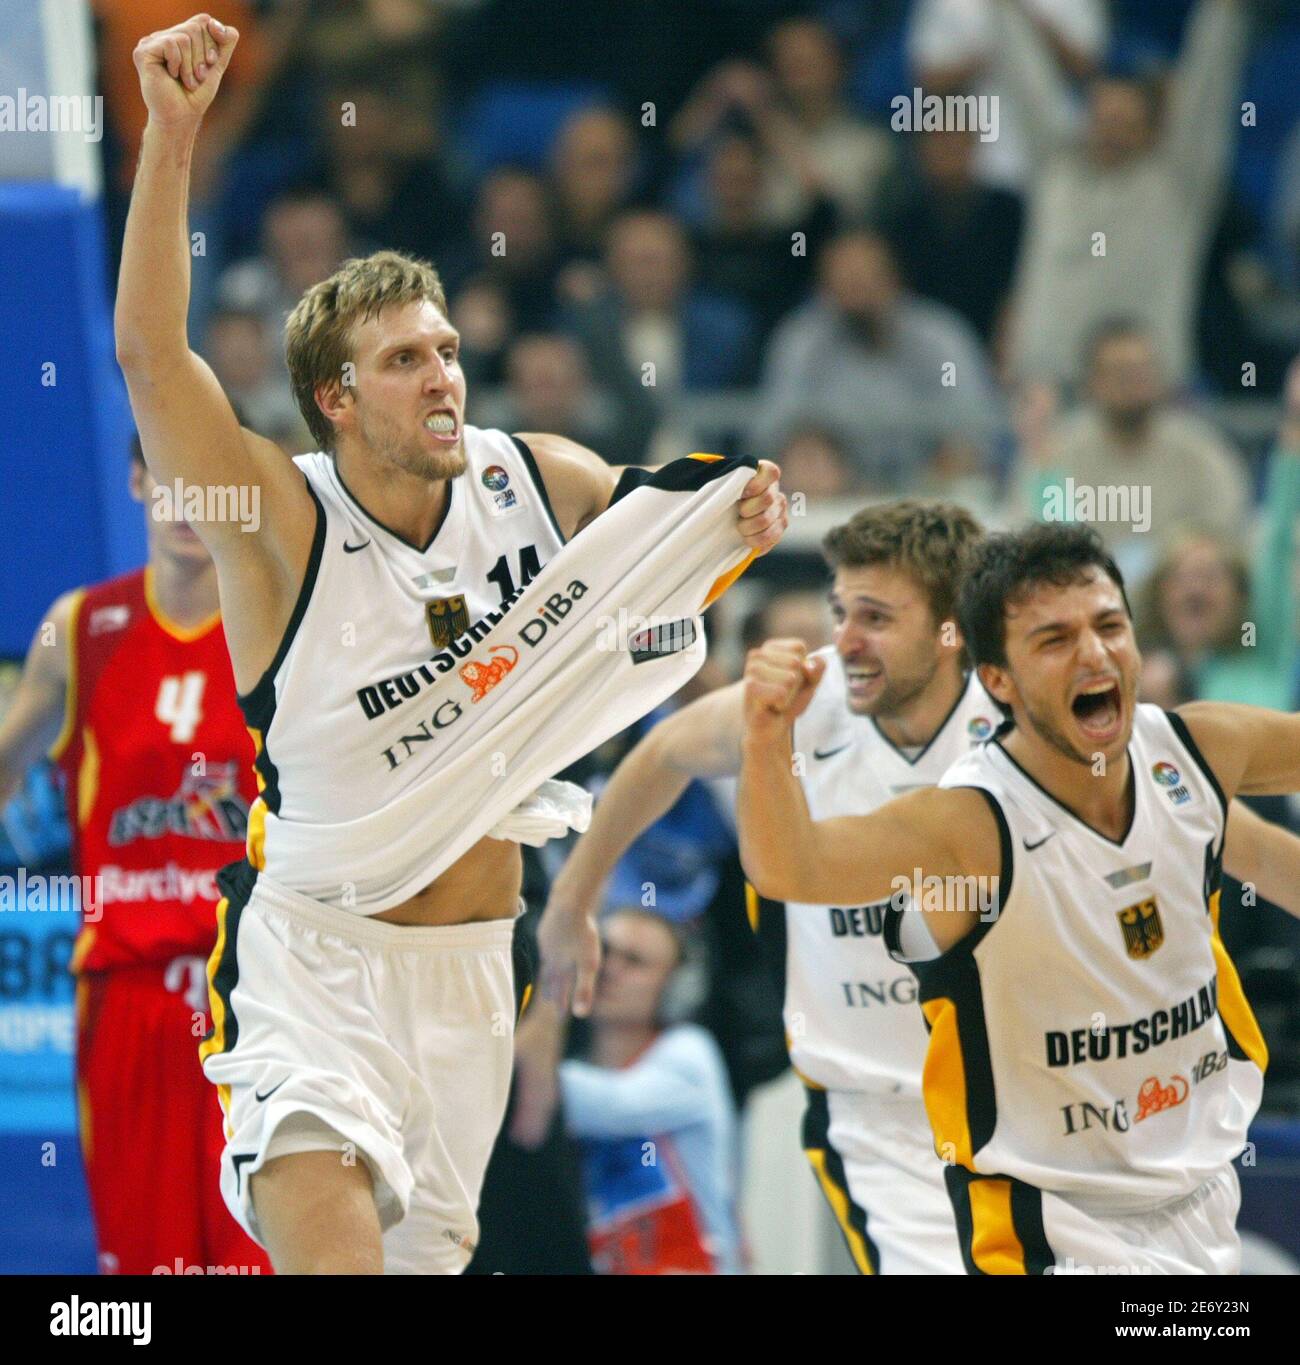 Germany's players (L-R) Dirk Nowitzki, Marco Pesic and Mithat Demirel  celebrate after beating Spain at the European basketball championship semi- final match in Belgrade, Serbia & Montenegro September 24, 2005. Germany  won 74-73